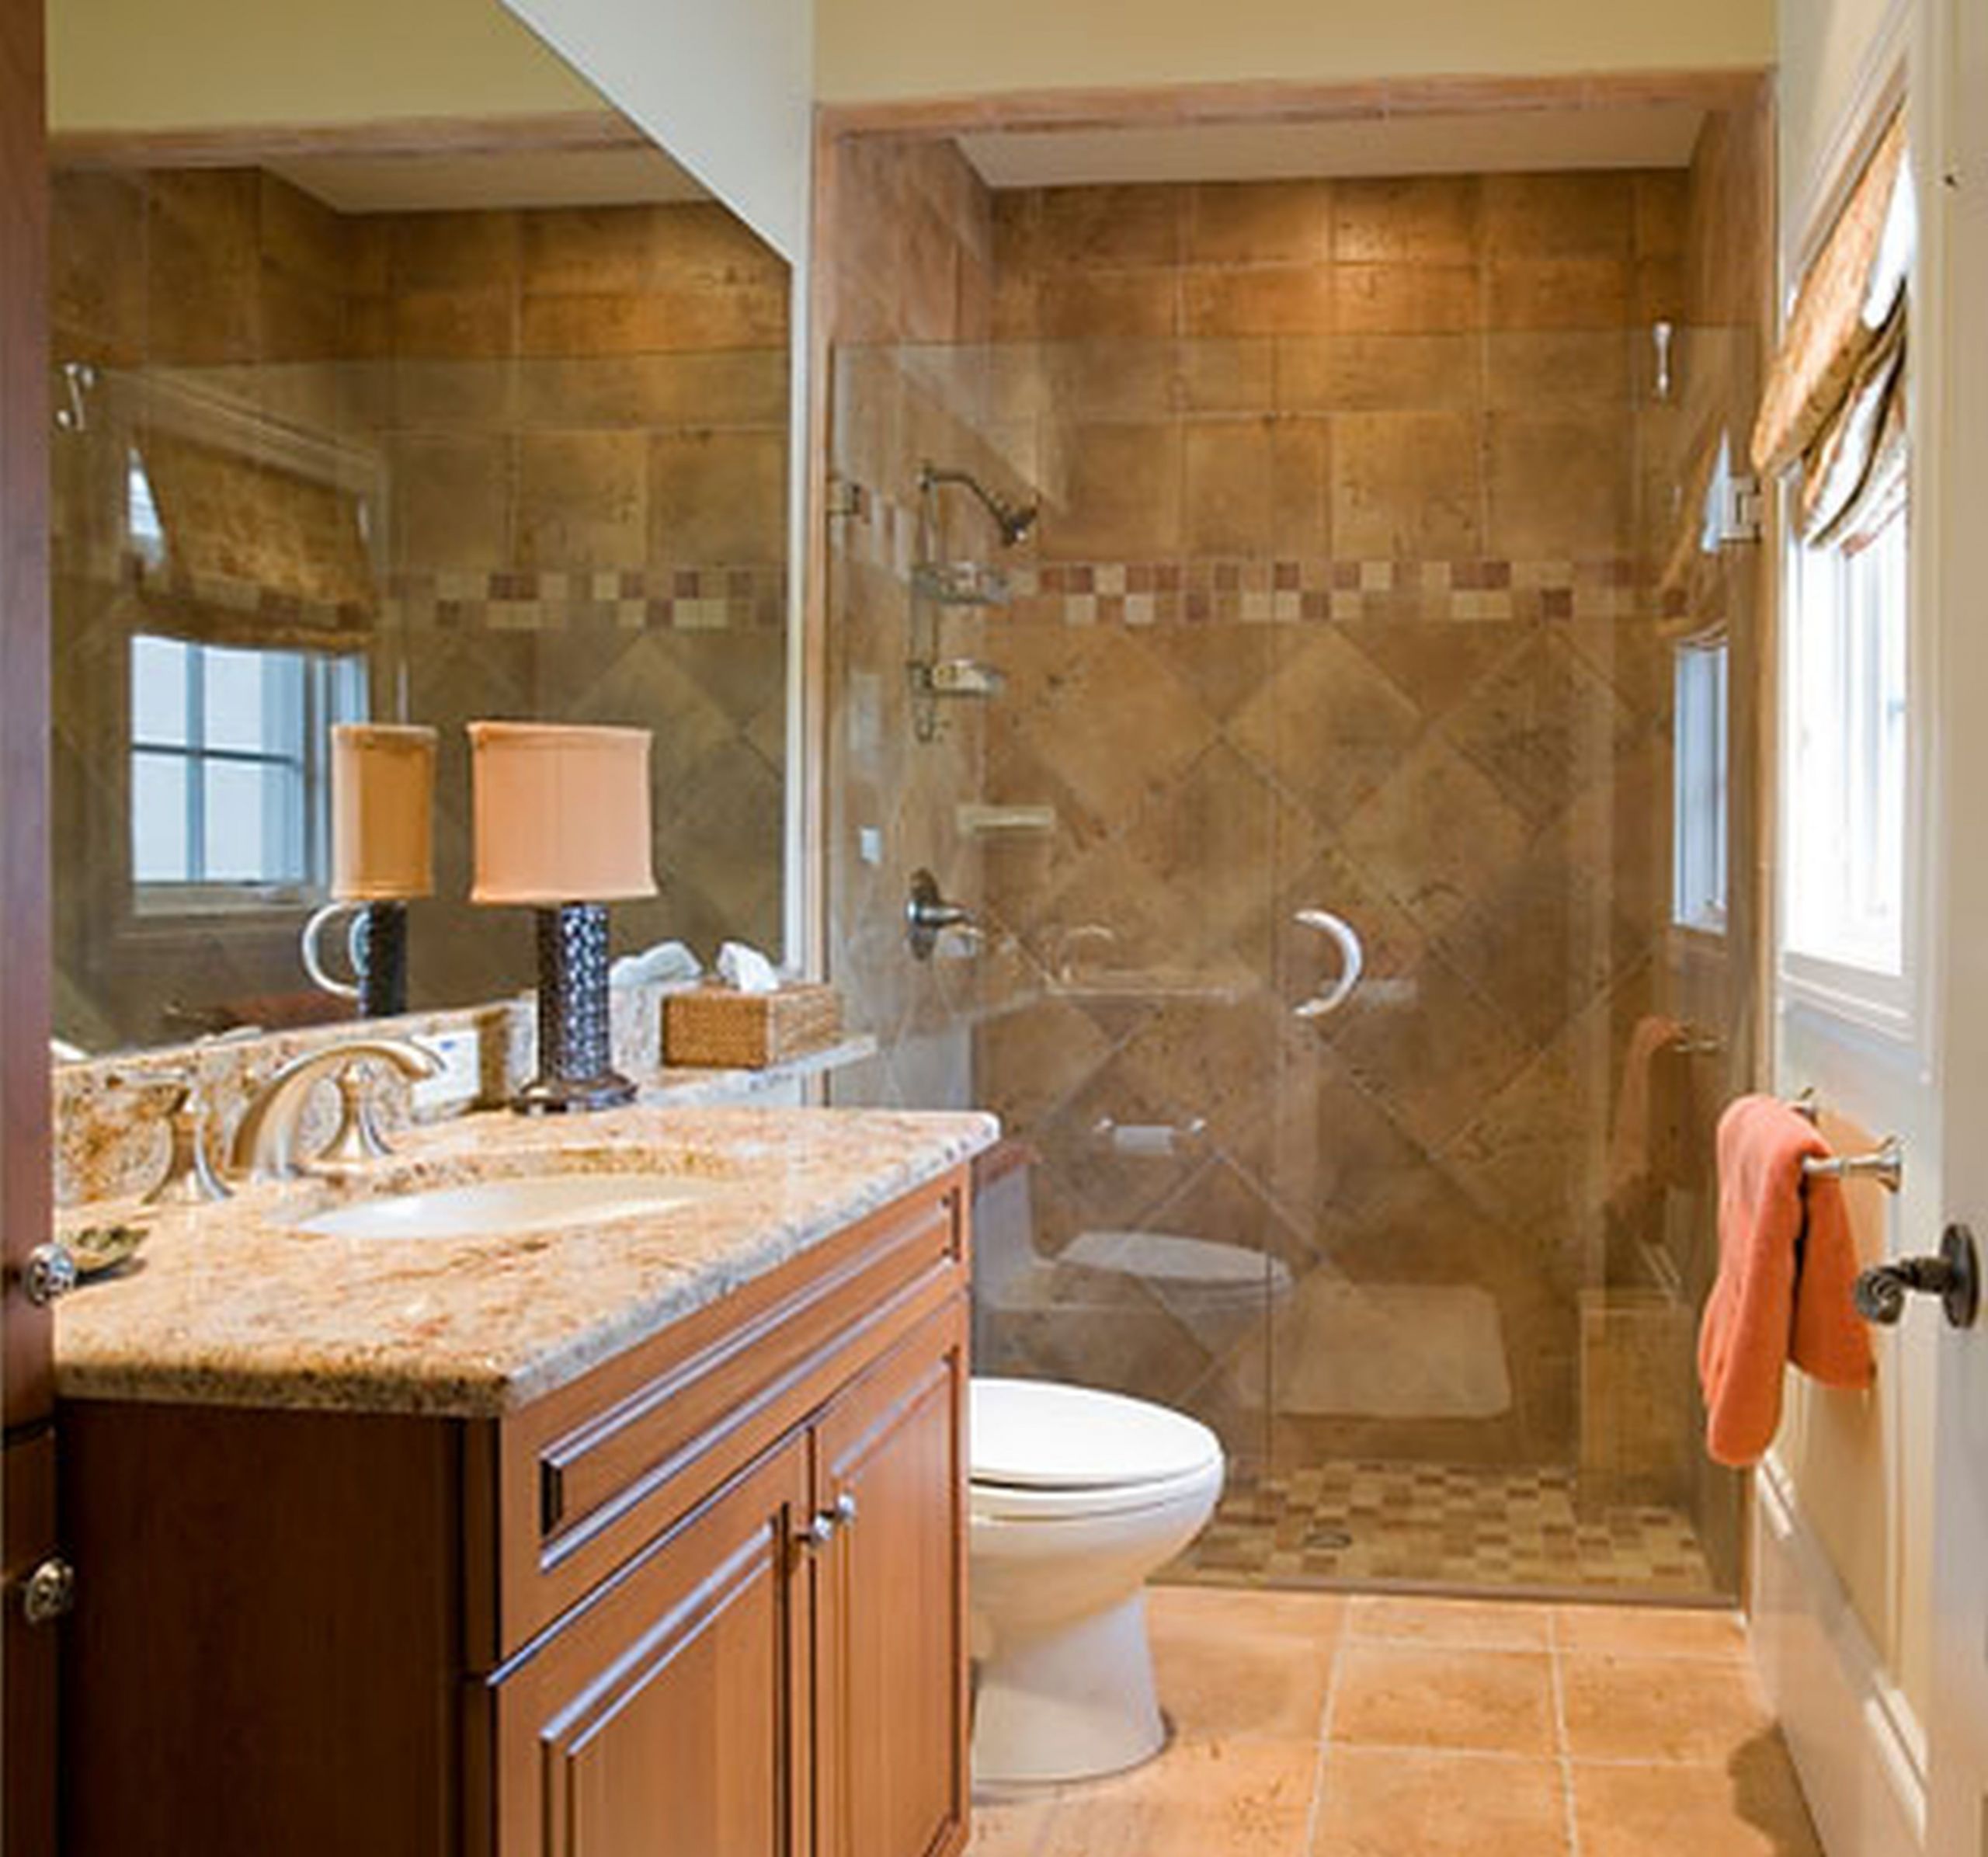 Remodel Bathroom Pictures
 Small Bathroom Remodel Ideas in Varied Modern Concepts